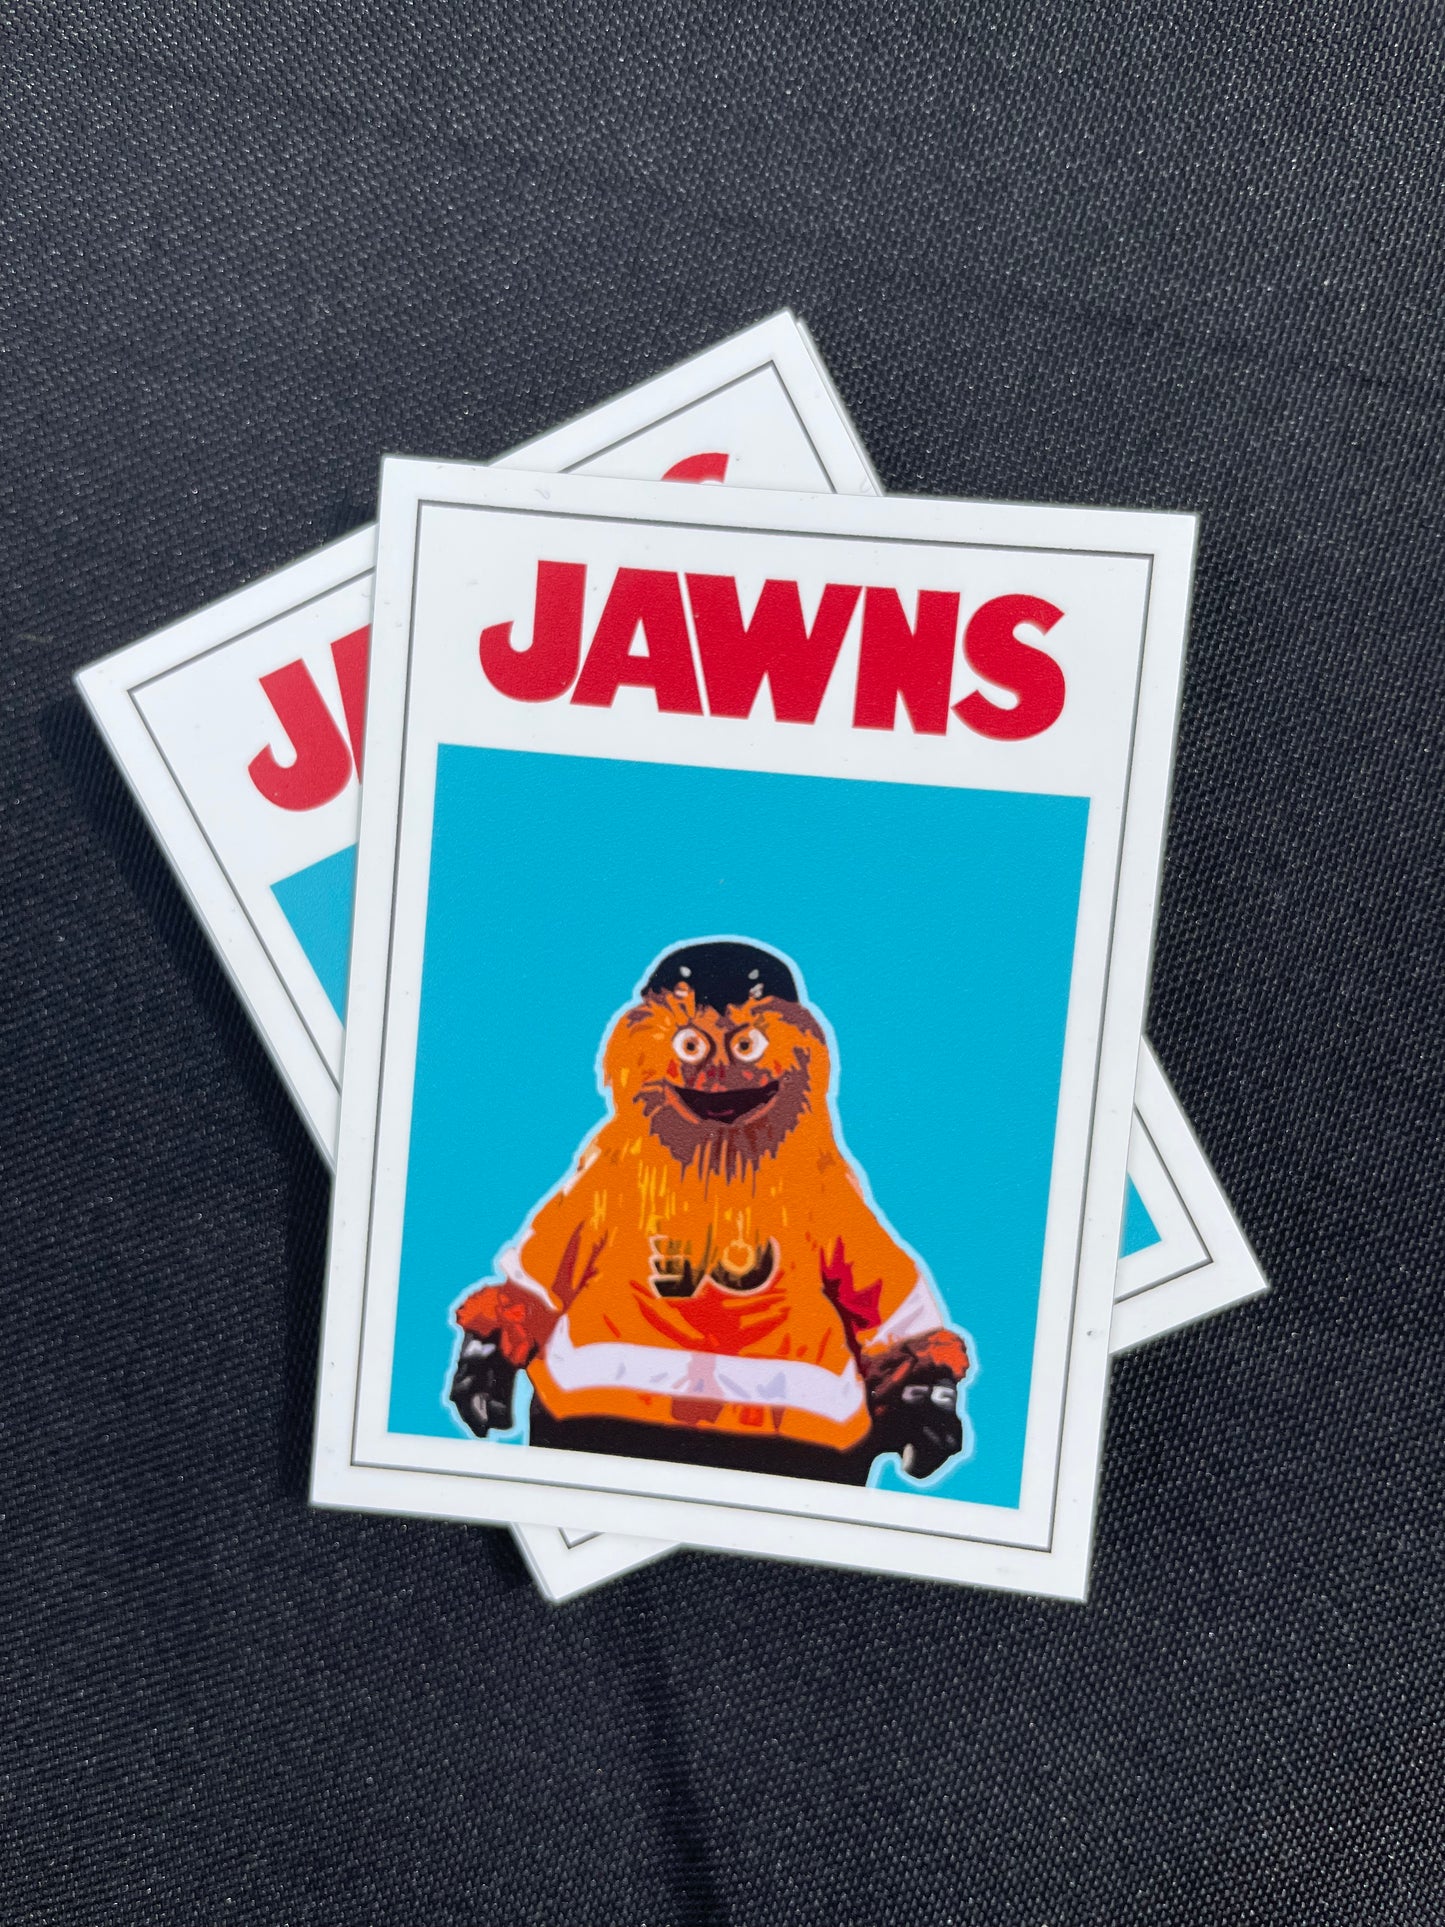 JAWNS (like JAWS) Gritty Magnet